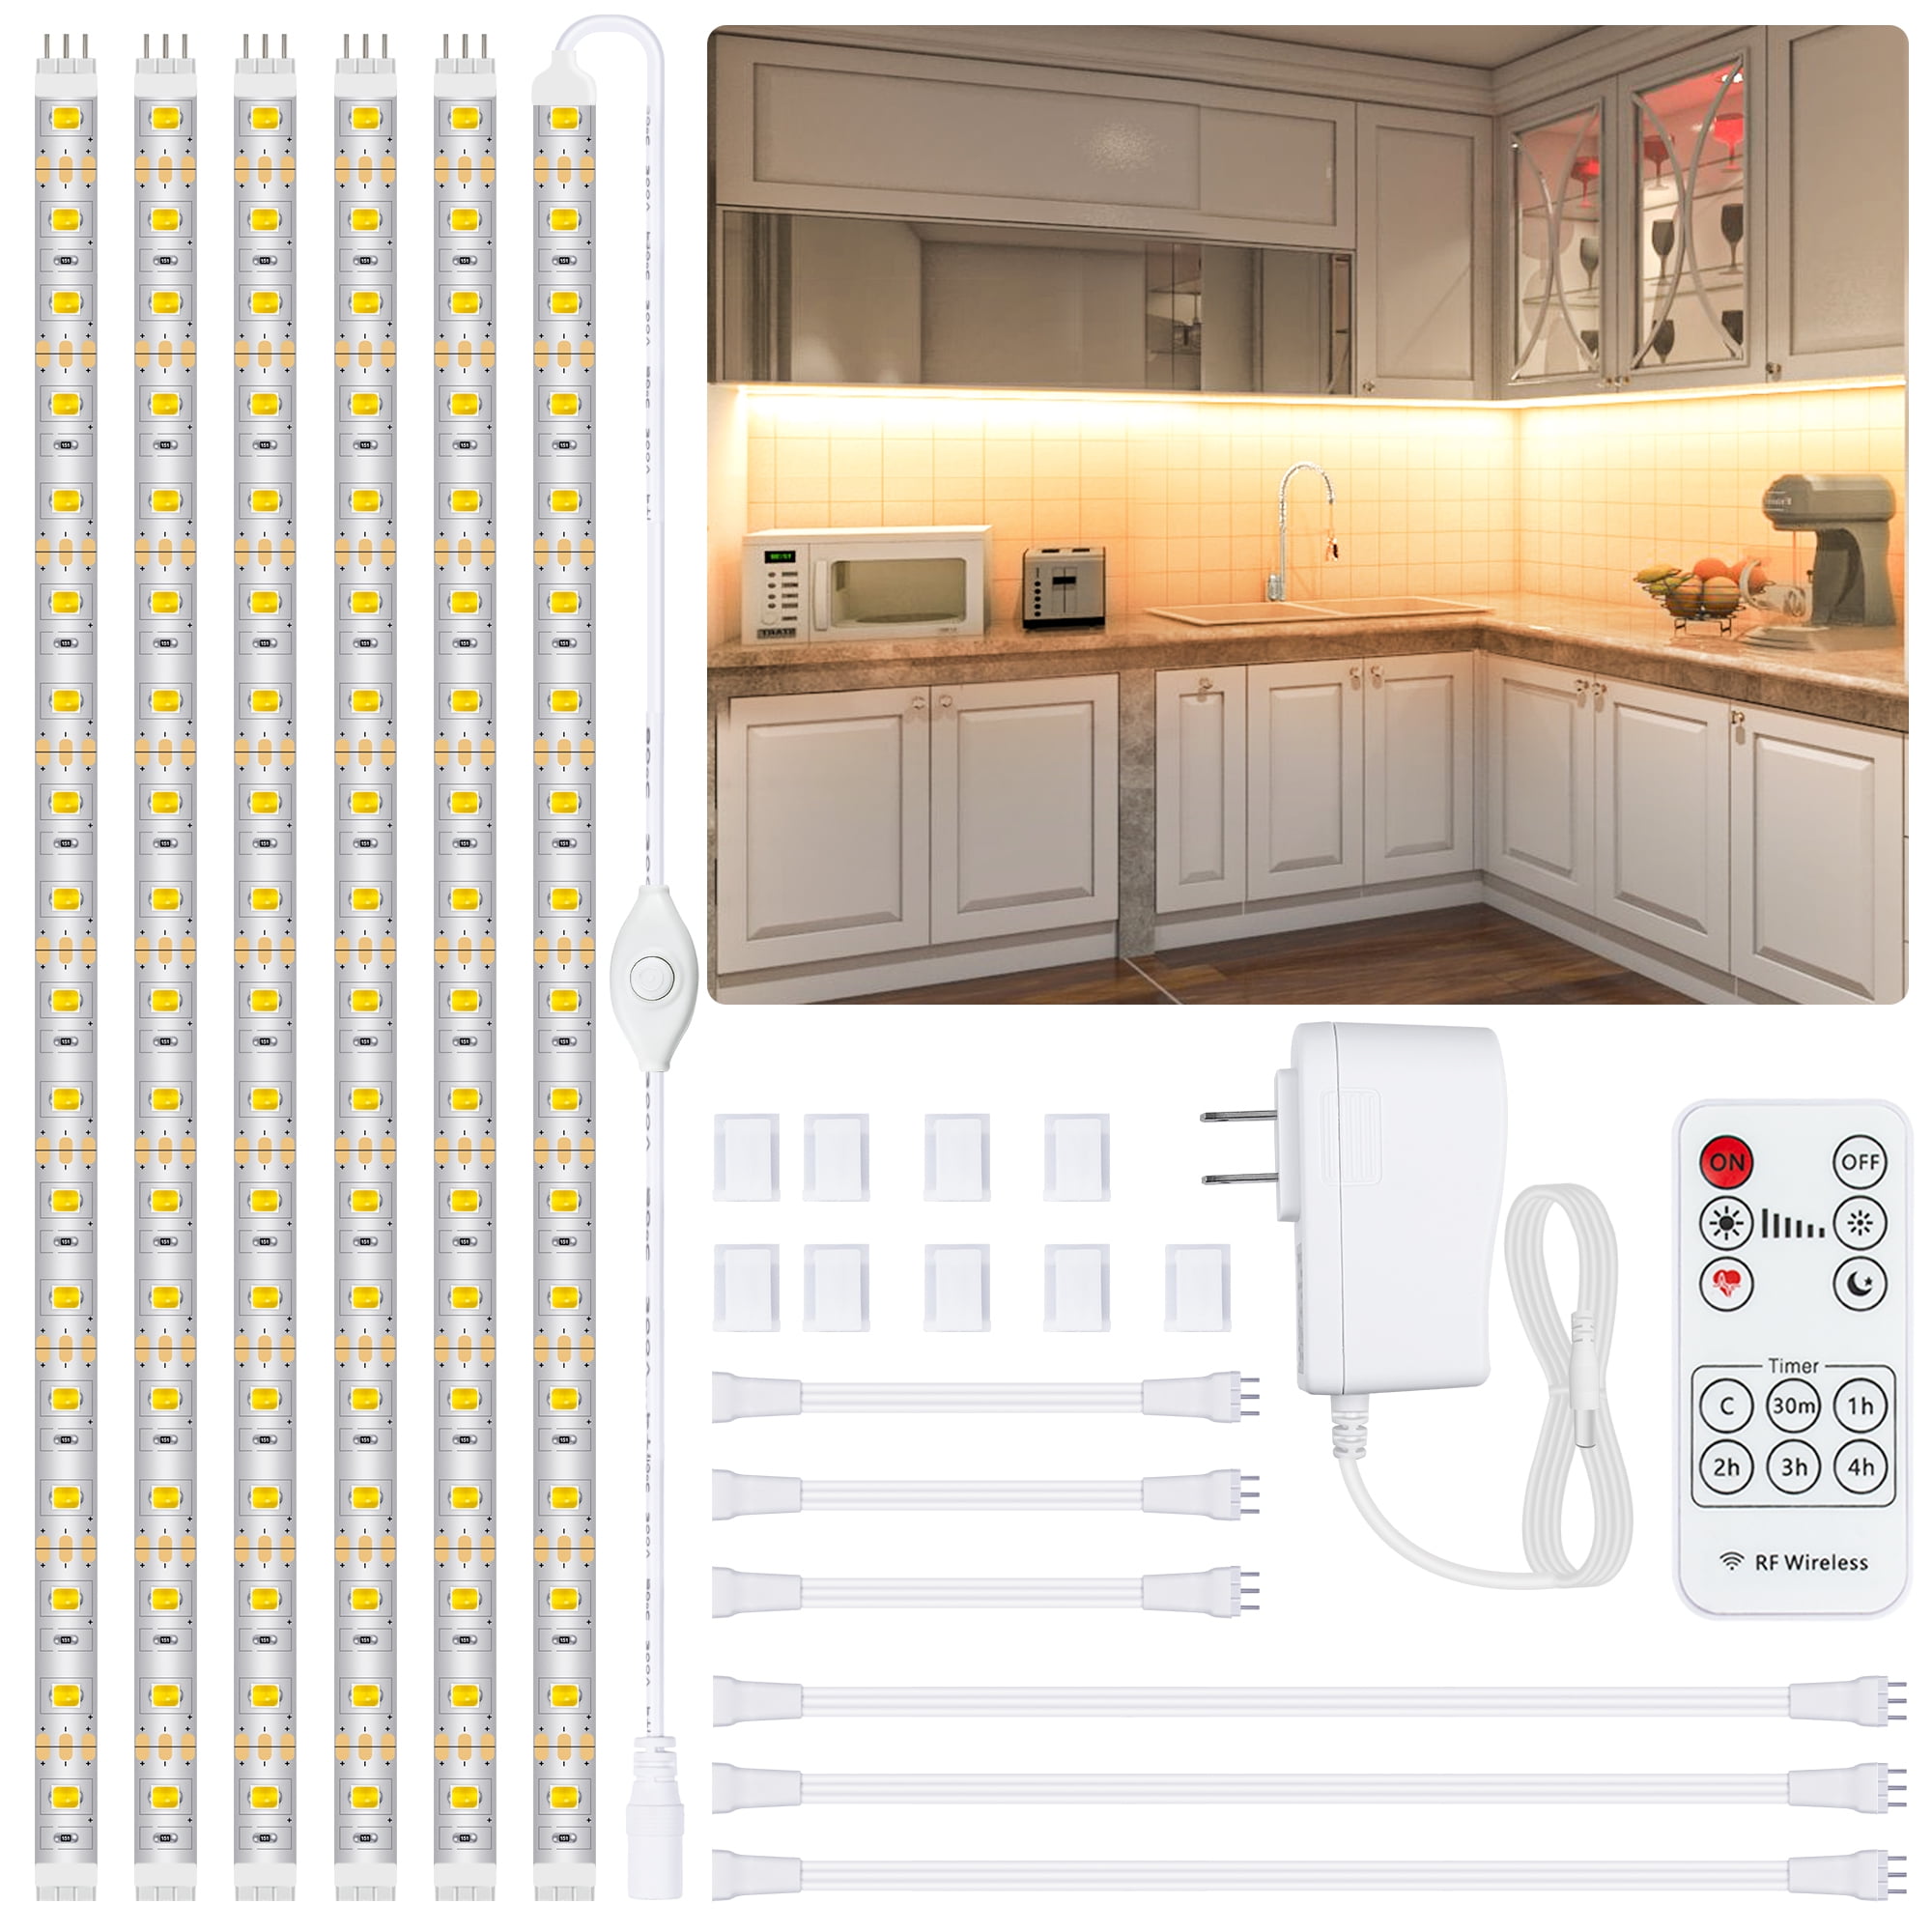 WILLED Dimmable Under Cabinet Lighting Kit 4 PCS COB LED Strips with Remote Control Closet Bookshelf Soft Light for Kitchen Counter Warm White 2700K with UL-Listed Adapter 